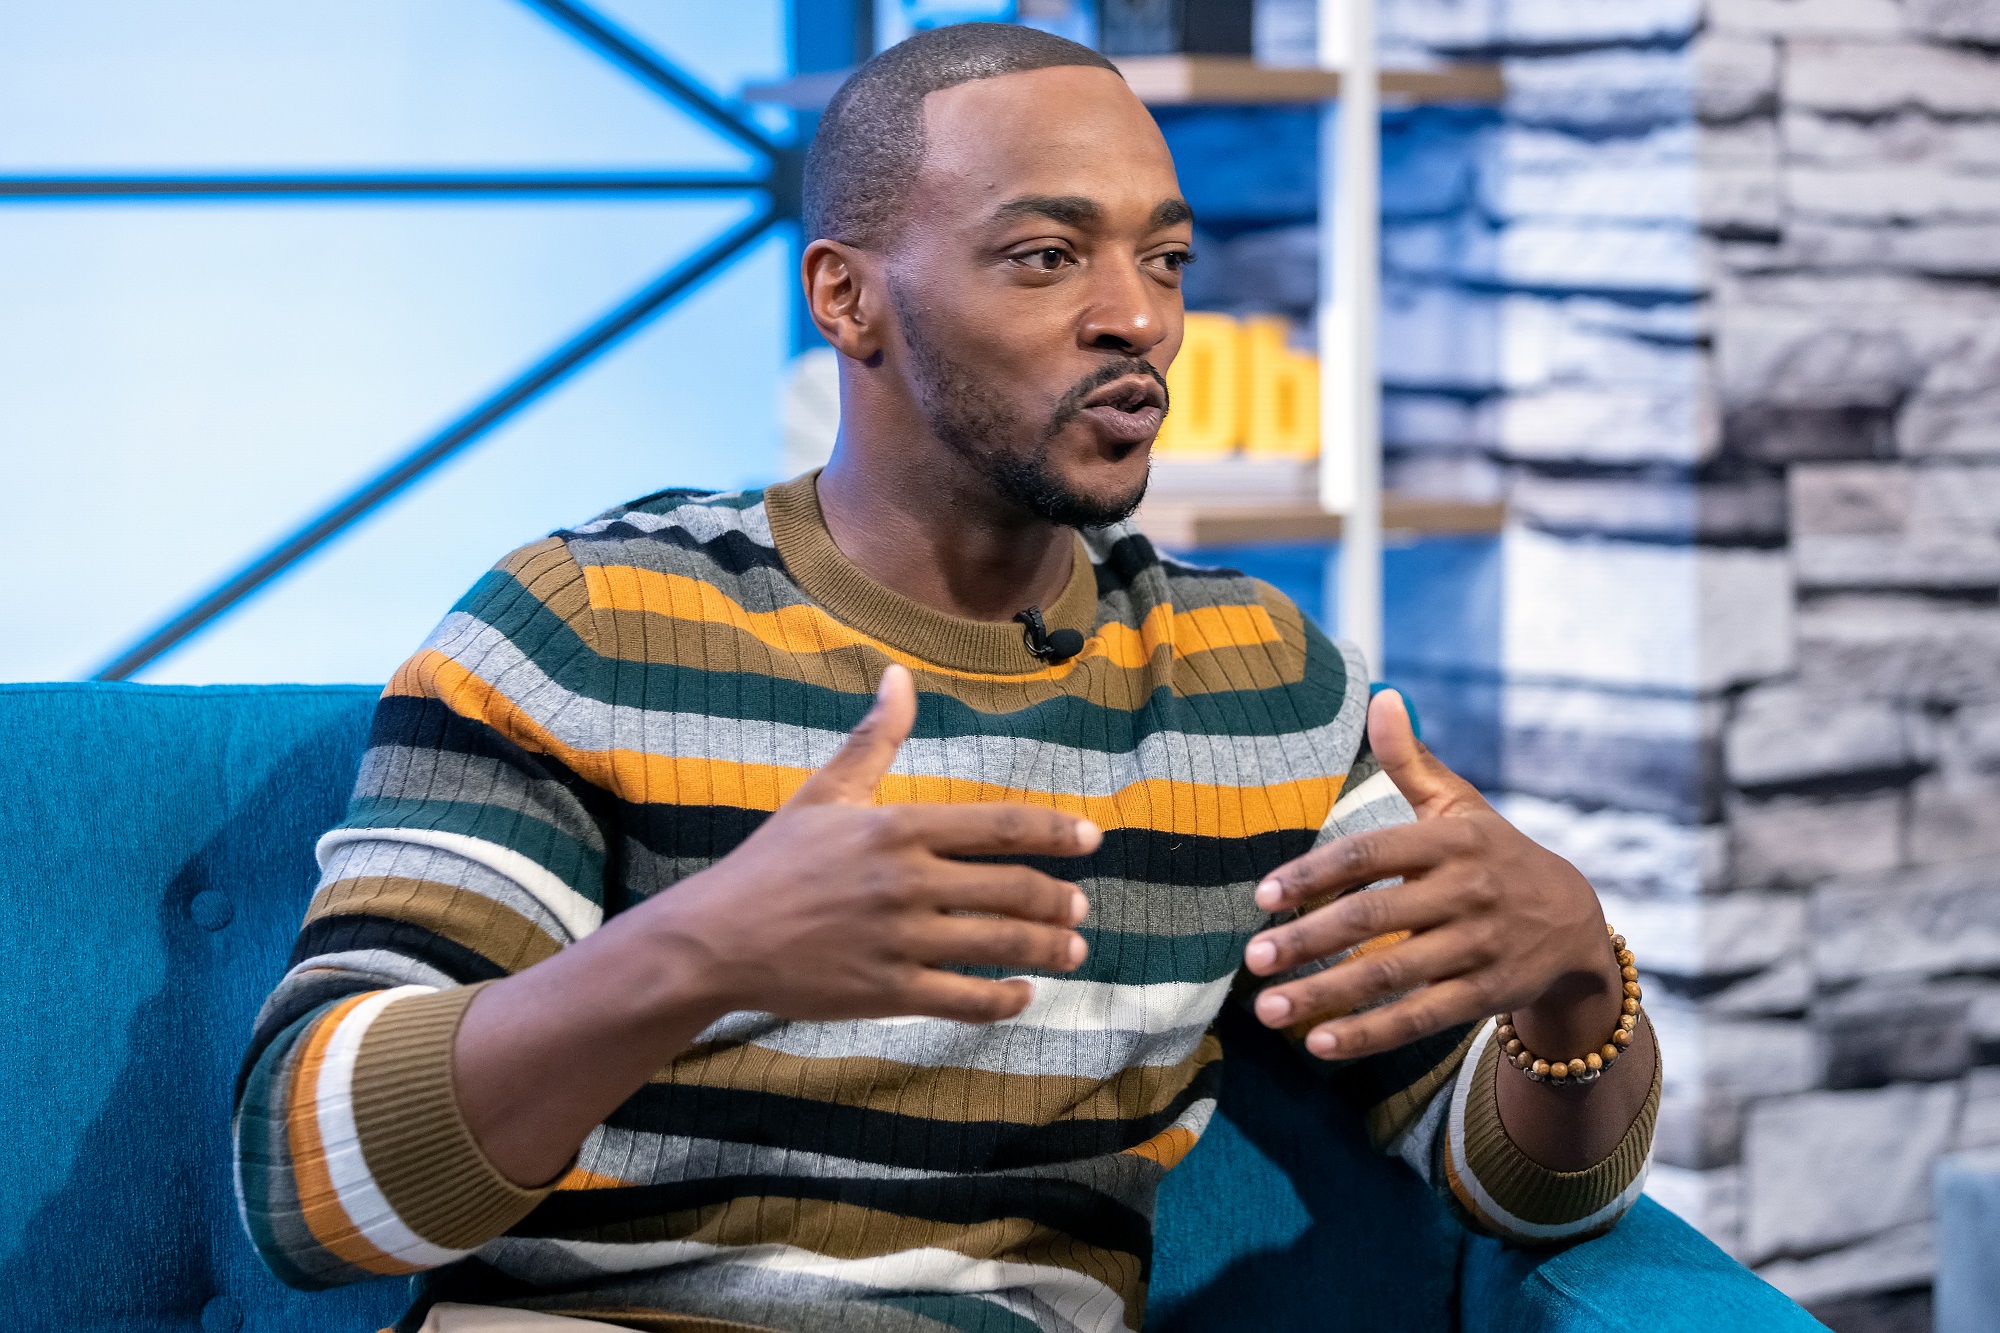 A candid photo of actor Anthony Mackie talking on 'The IMDb Show' in April 2019